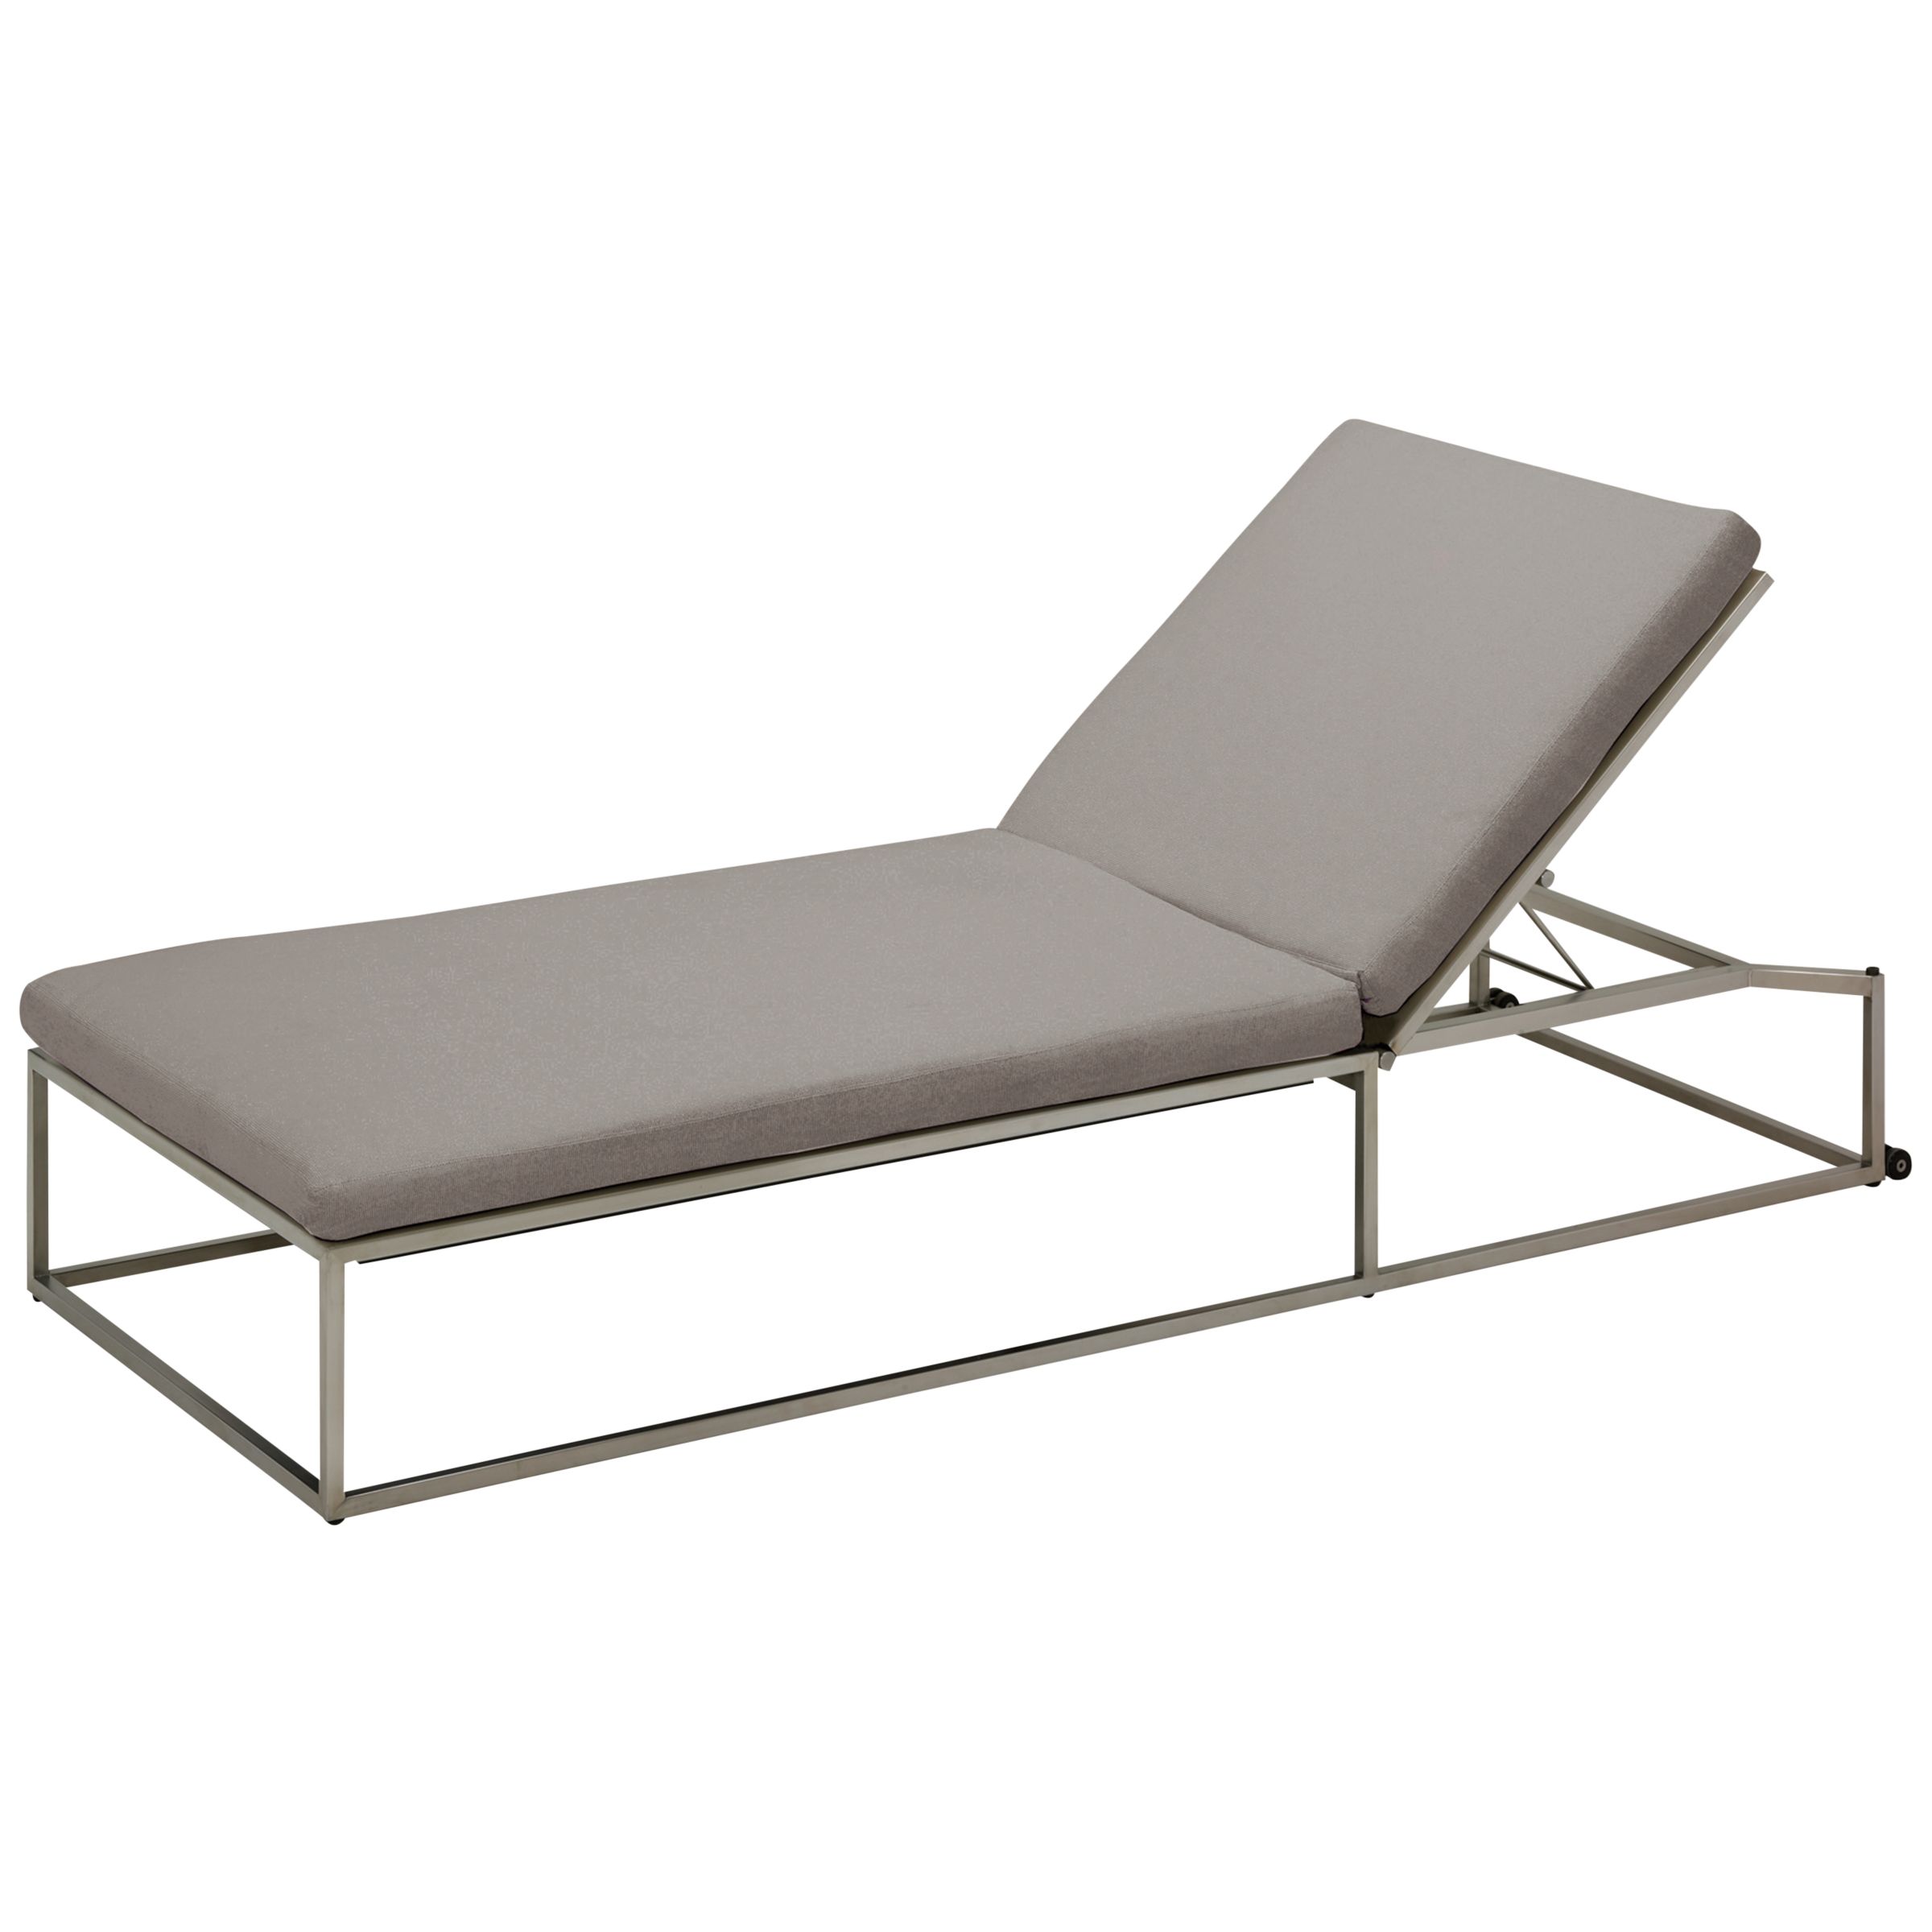 Gloster Cloud Lounger, Taupe